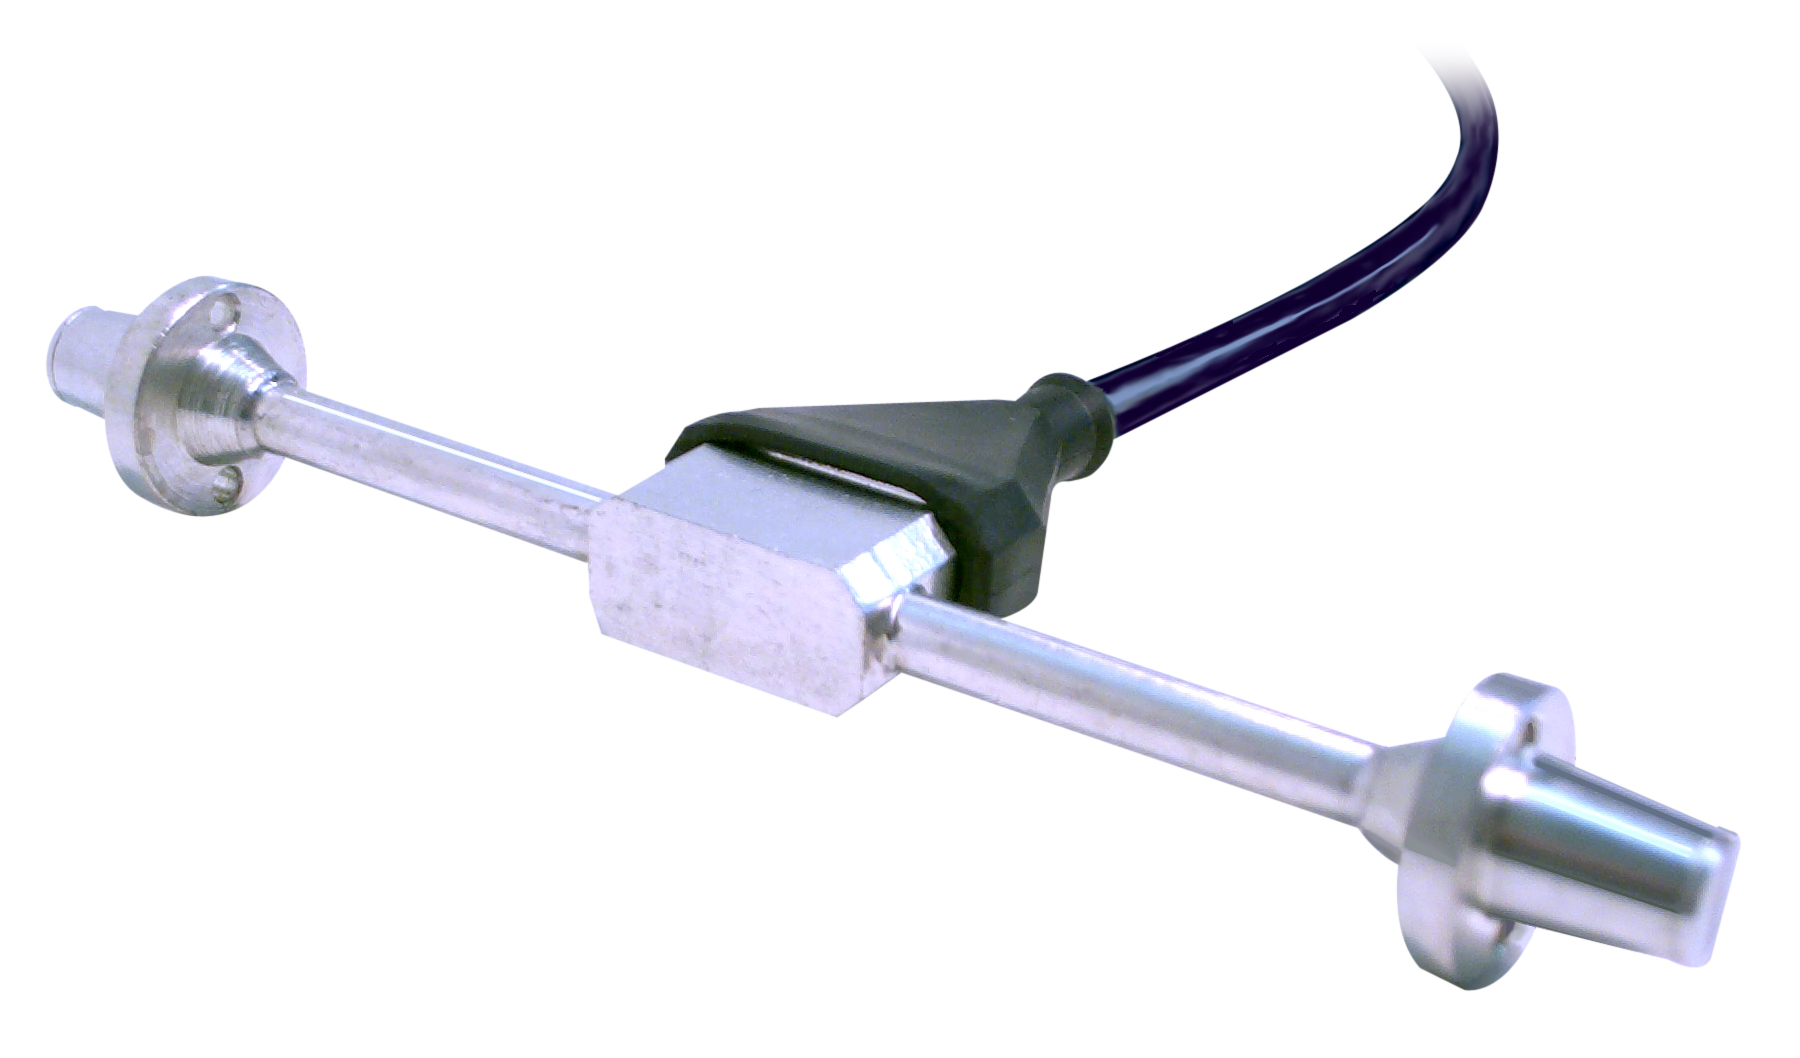 C-110 Vibrating Wire Strain Gauges: Accurate and Corrosion Resistant